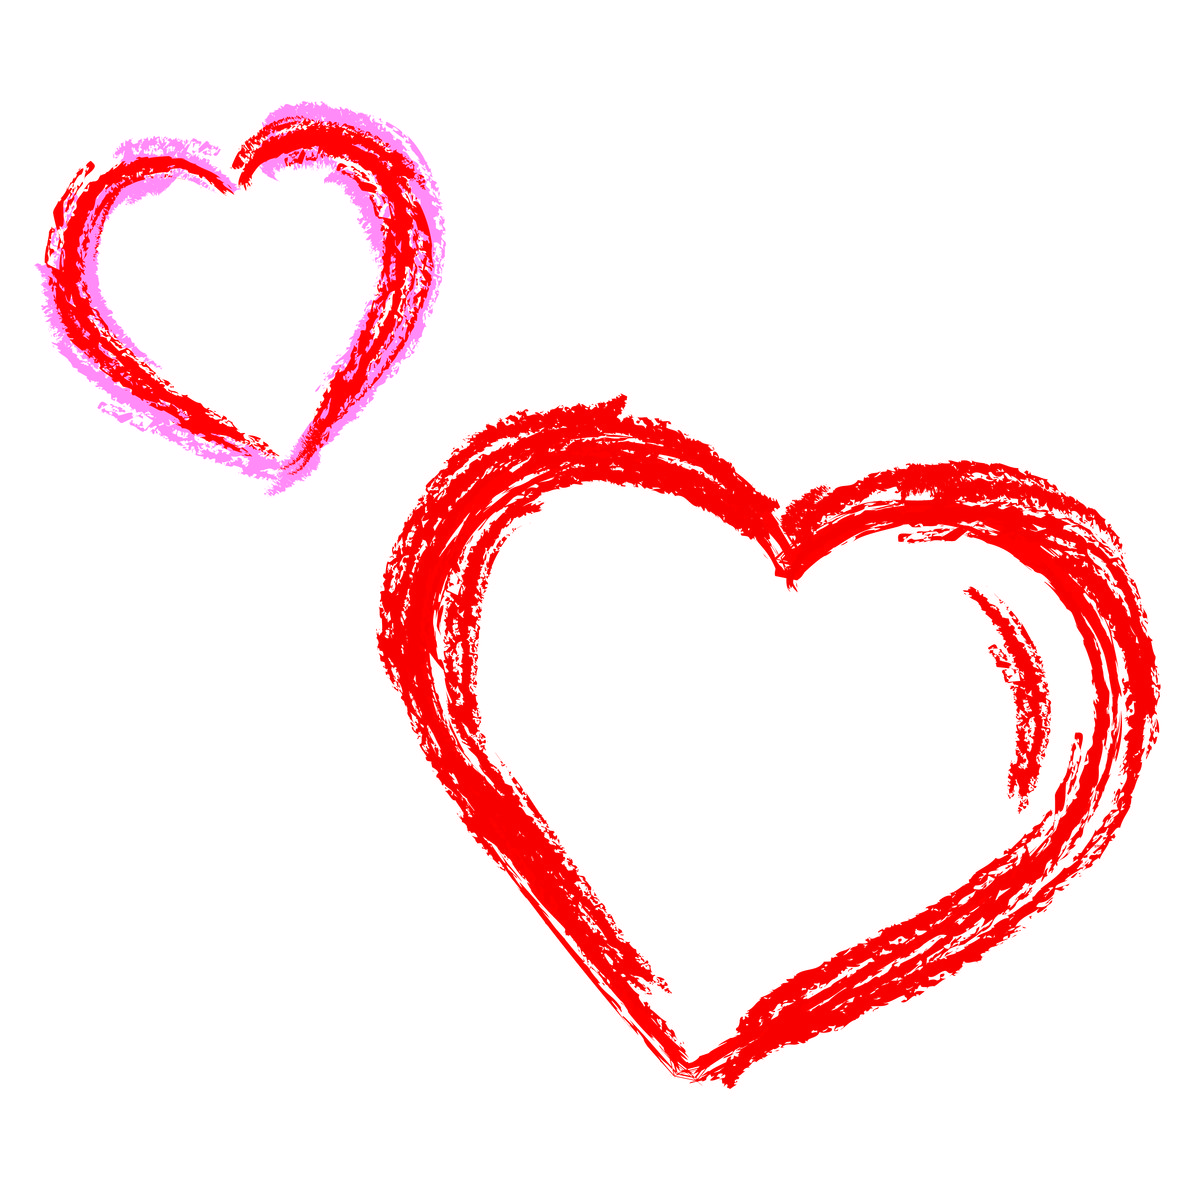 a heart drawing with a red stroke